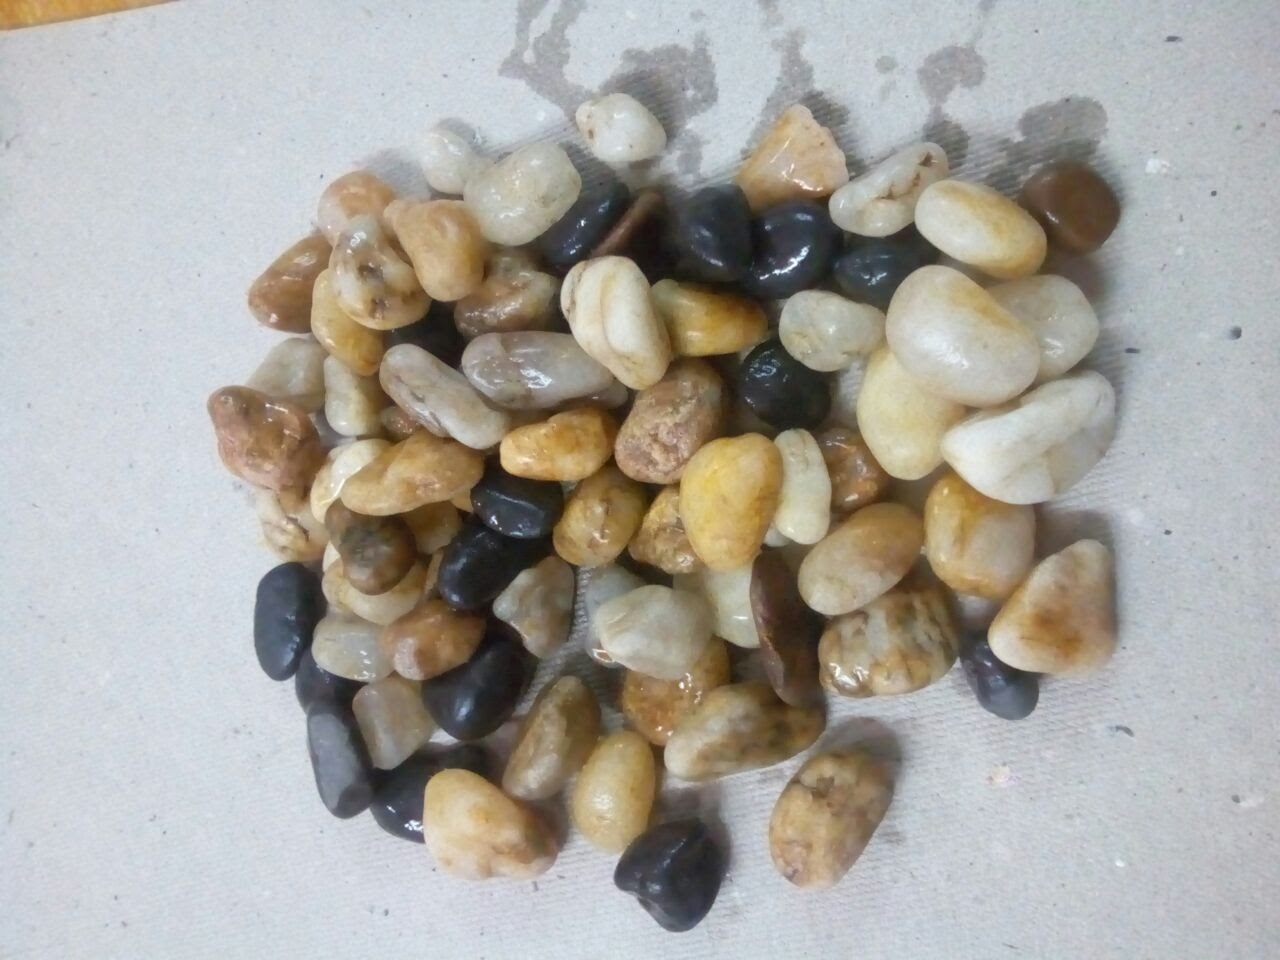 River Mix Natural Black of White Machine Polished Pebbles and Gravels